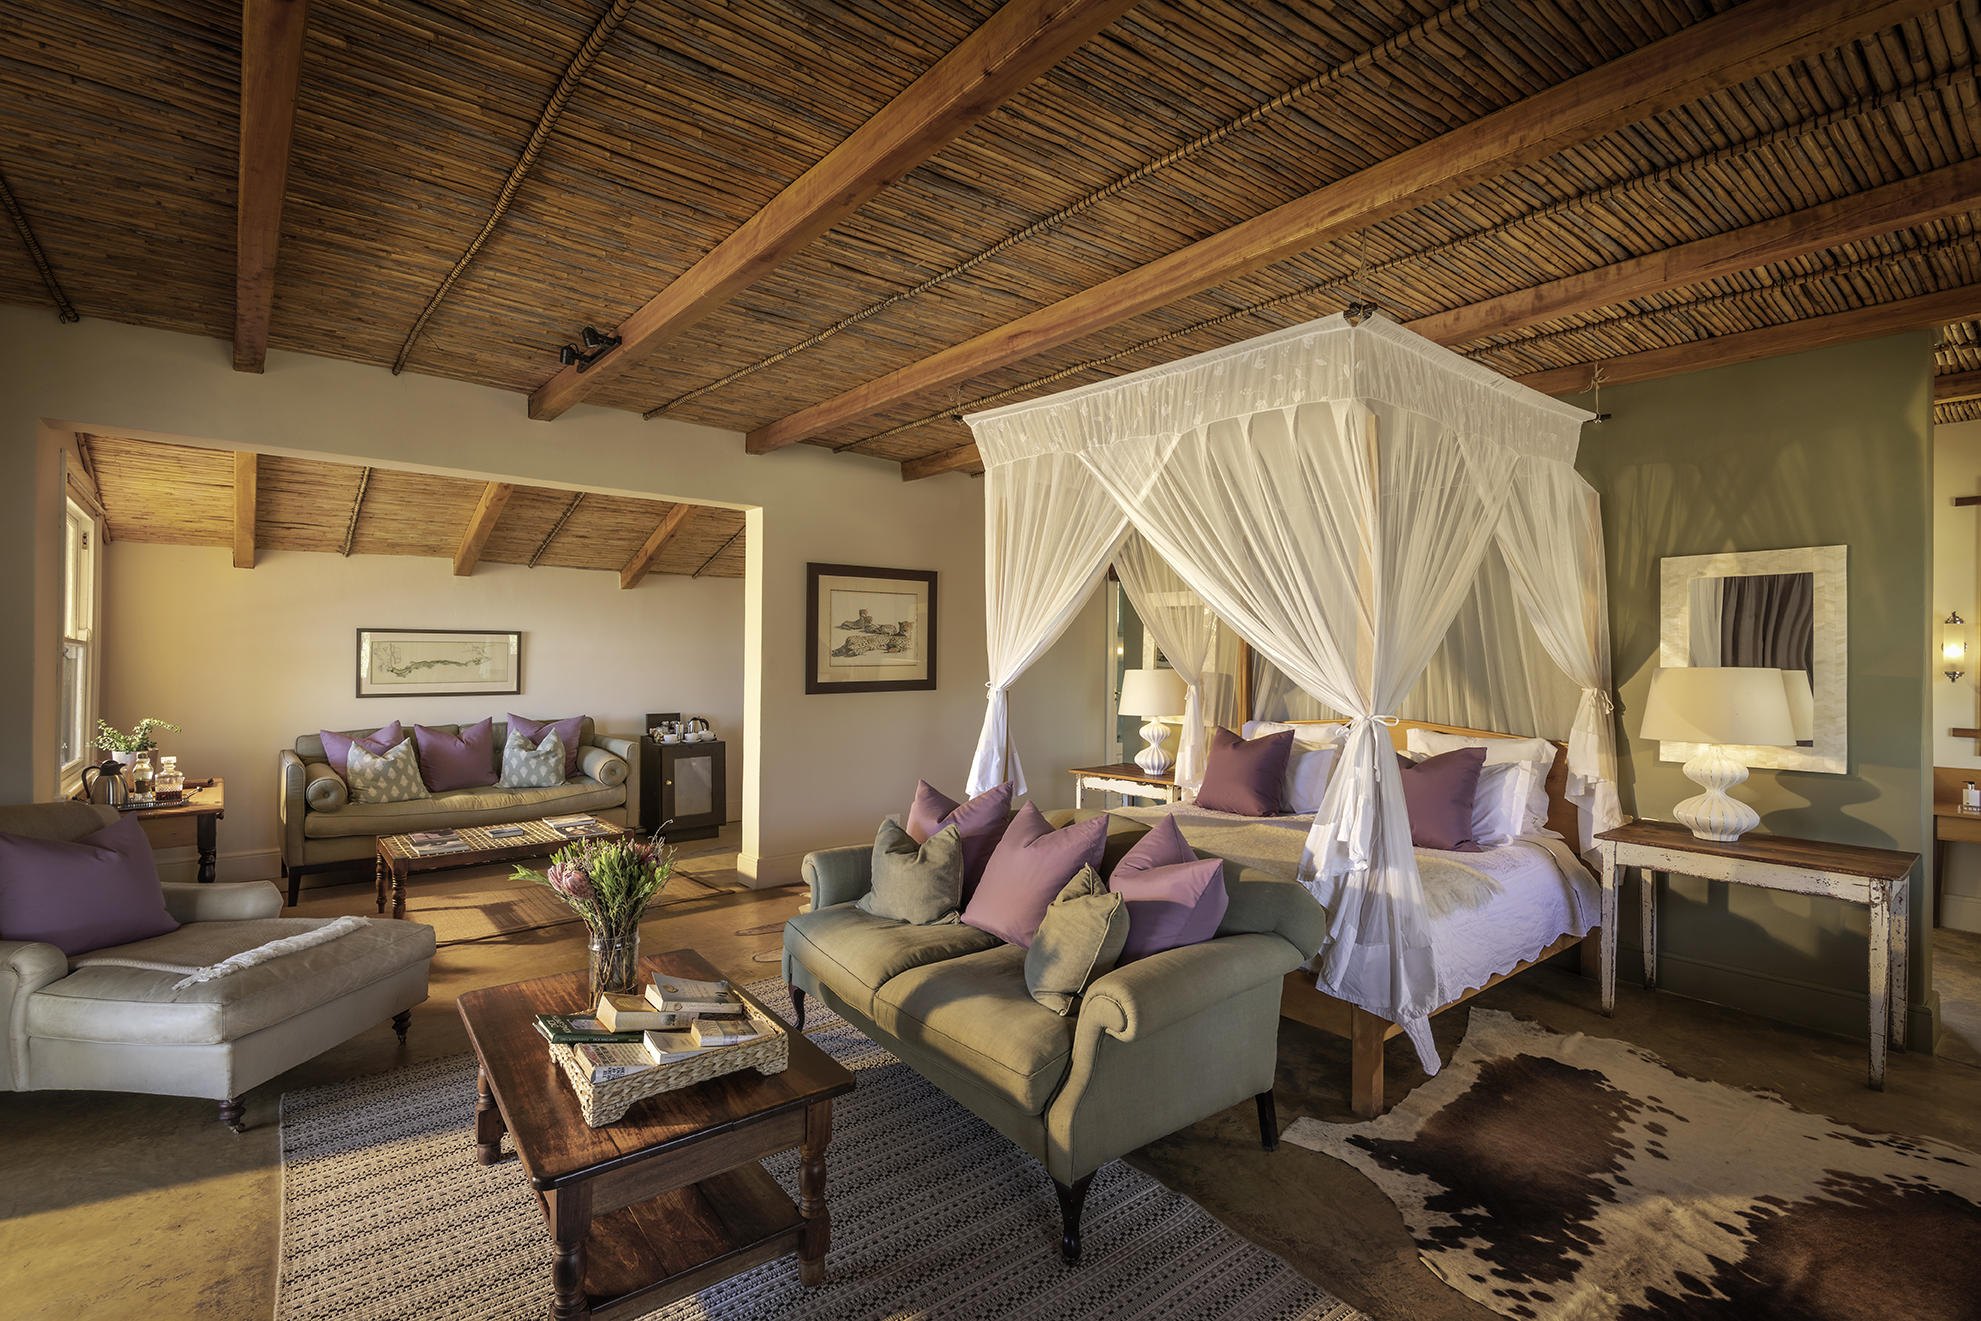 The largest Karoo Suite provides an ideal family suite with space for extra beds for children